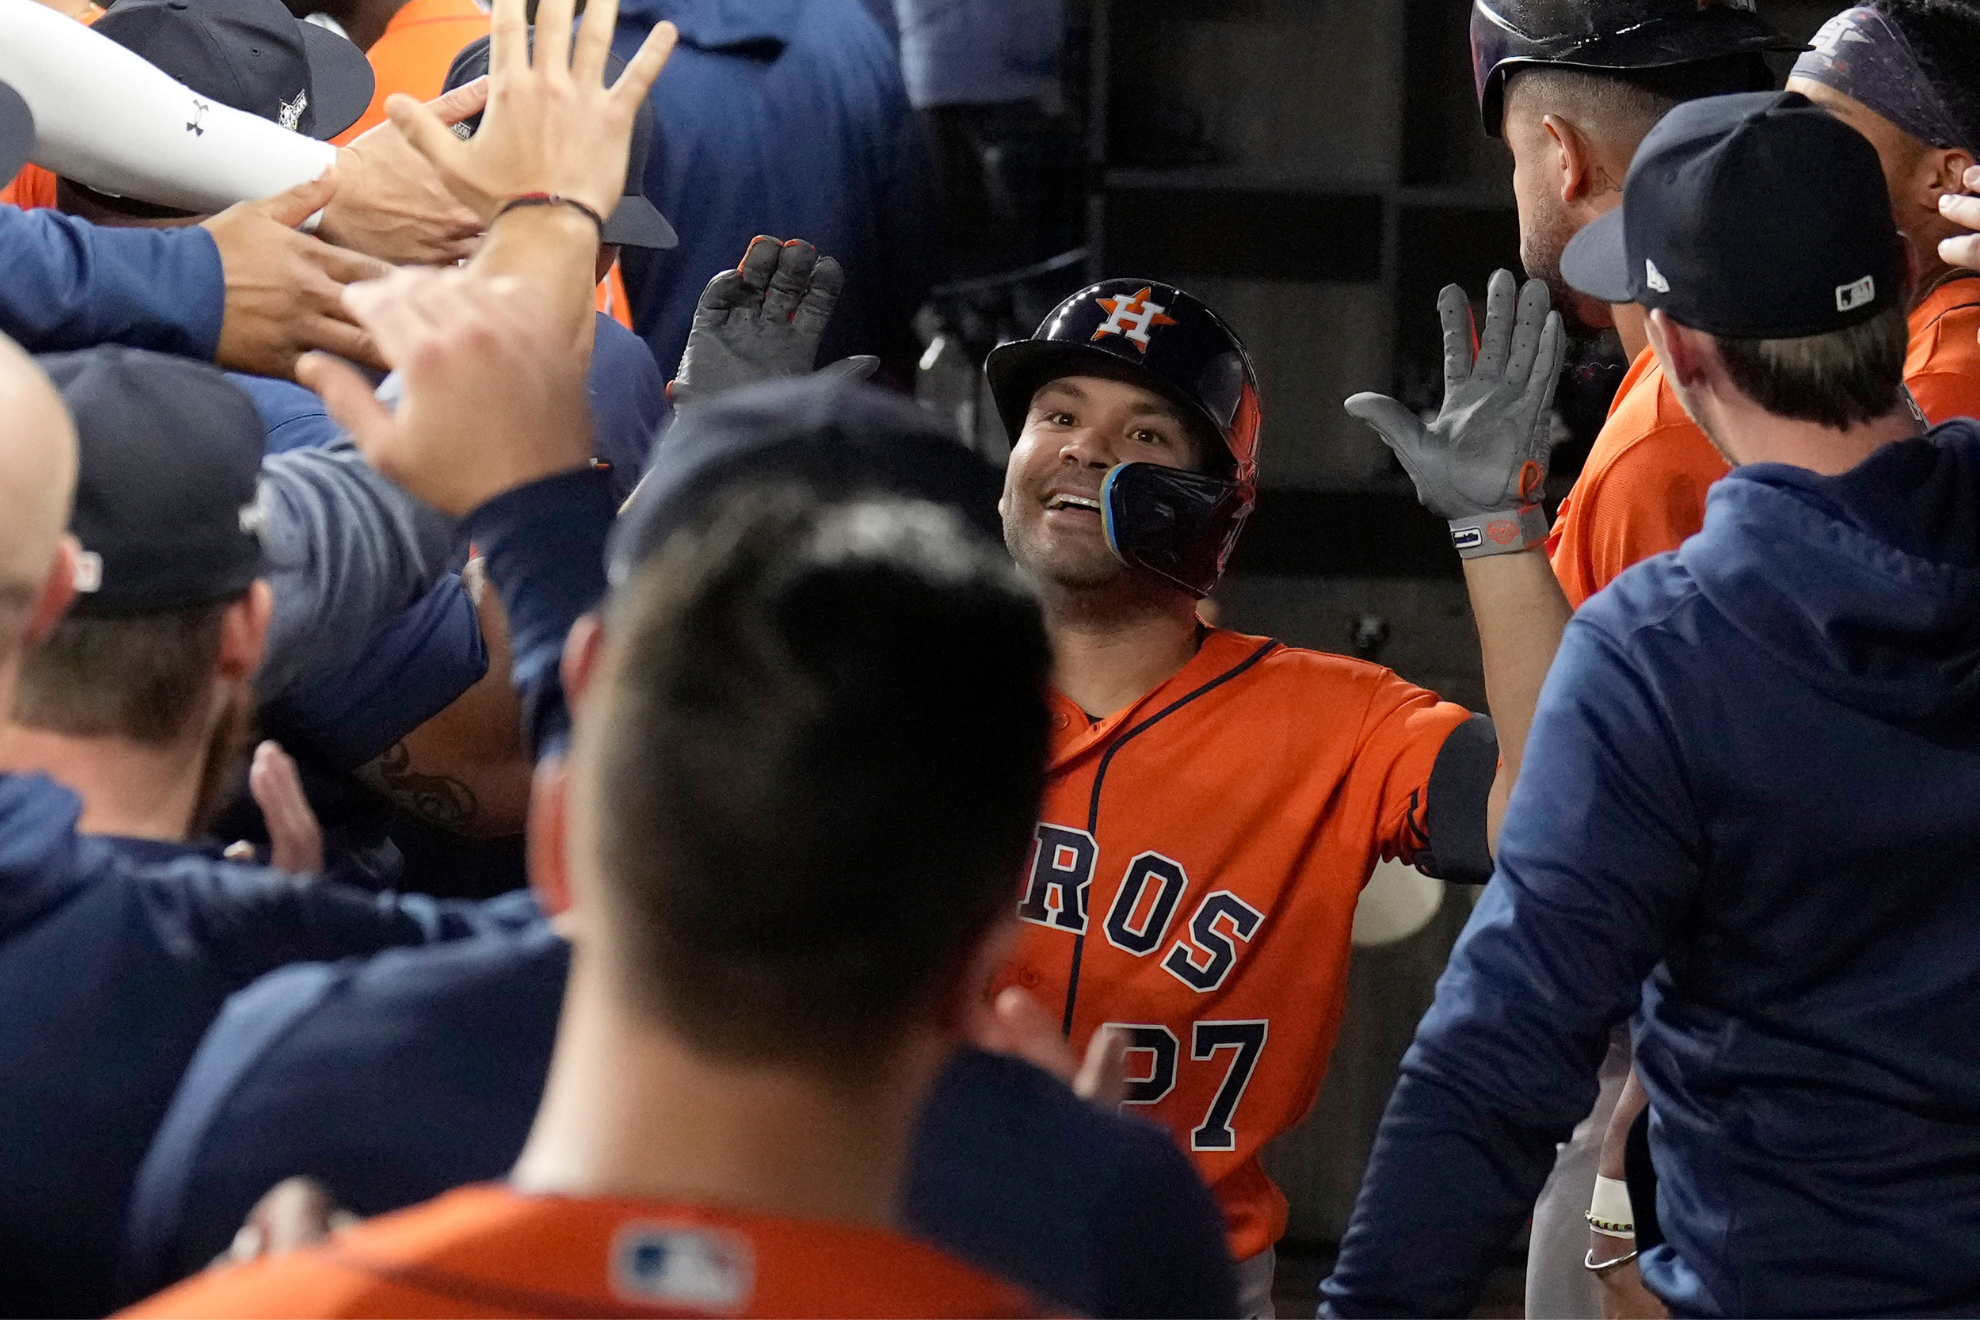 Jose Altuve got the Astros off to the ideal start.